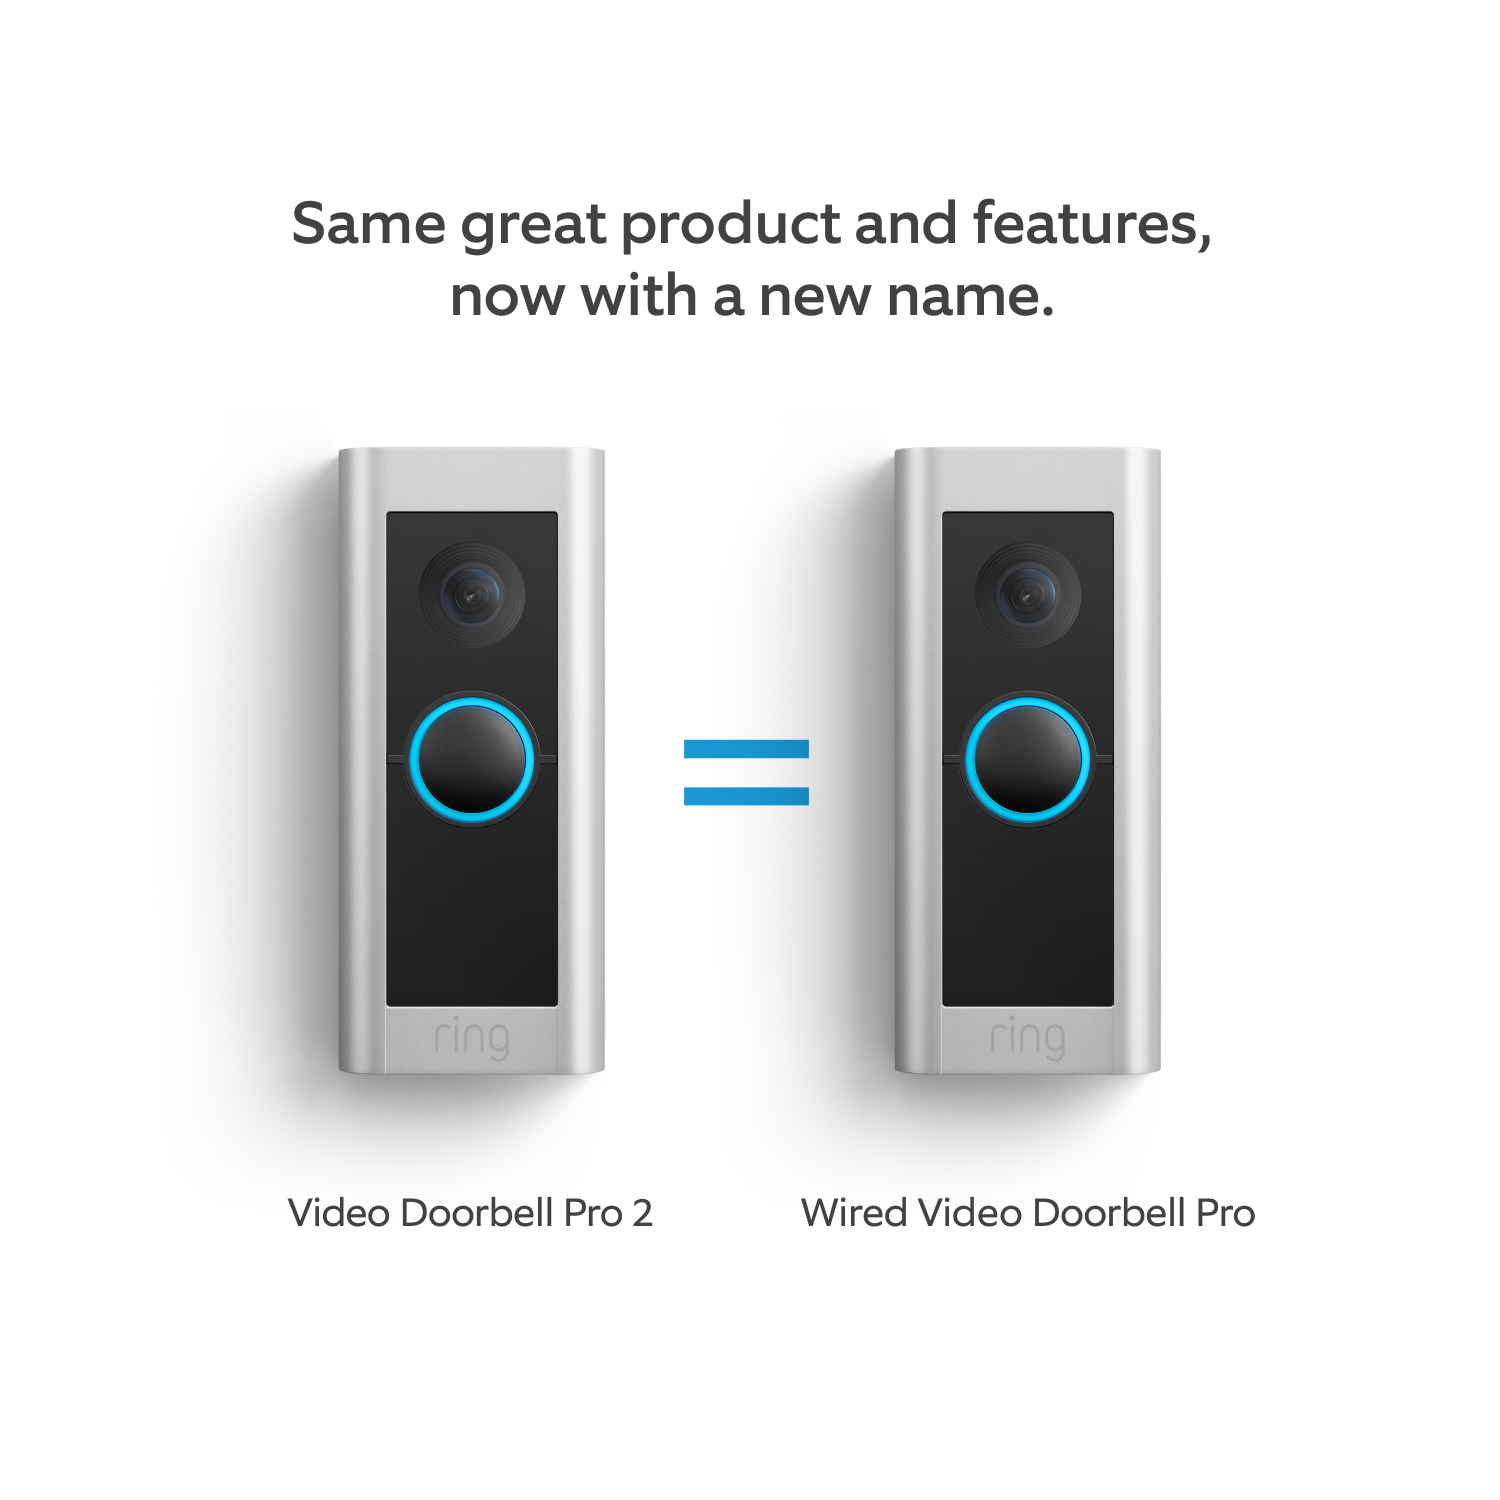 Wired Video Doorbell Pro Plug-in (Formerly Video Doorbell Pro 2 with Plug-in Adapter) - RVD Pro 2 = Wired Video Doorbell Pro - Lifestyle image